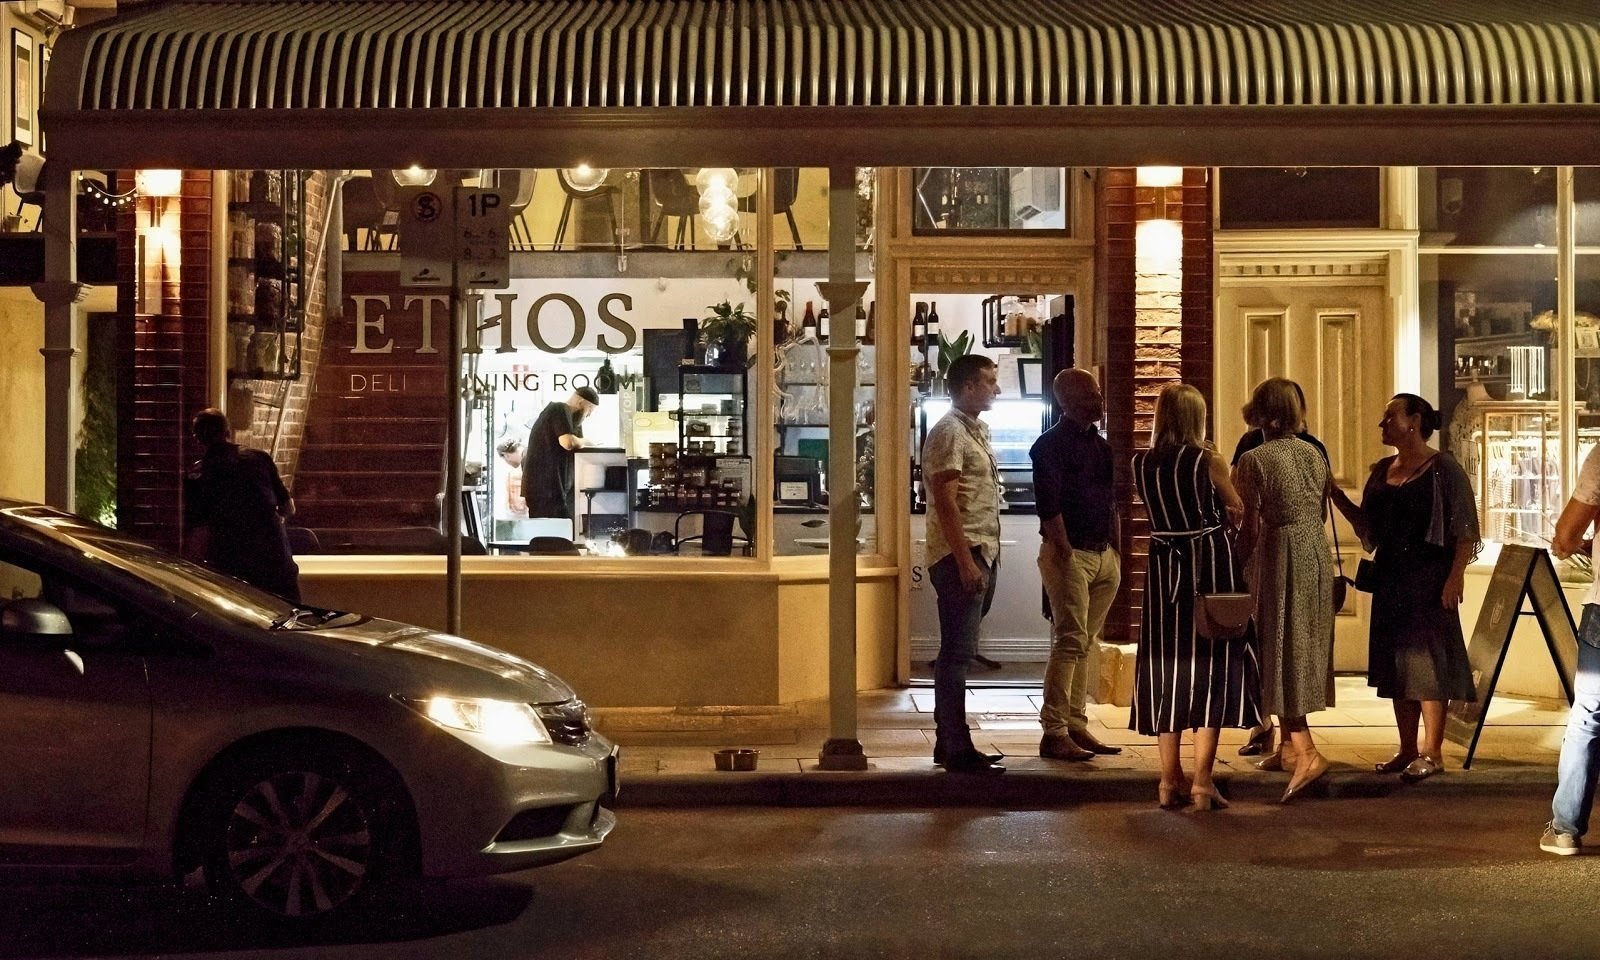 <span class="translation_missing" title="translation missing: en.meta.location_title, location_name: Ethos Deli + Dining Room, city: Perth">Location Title</span>